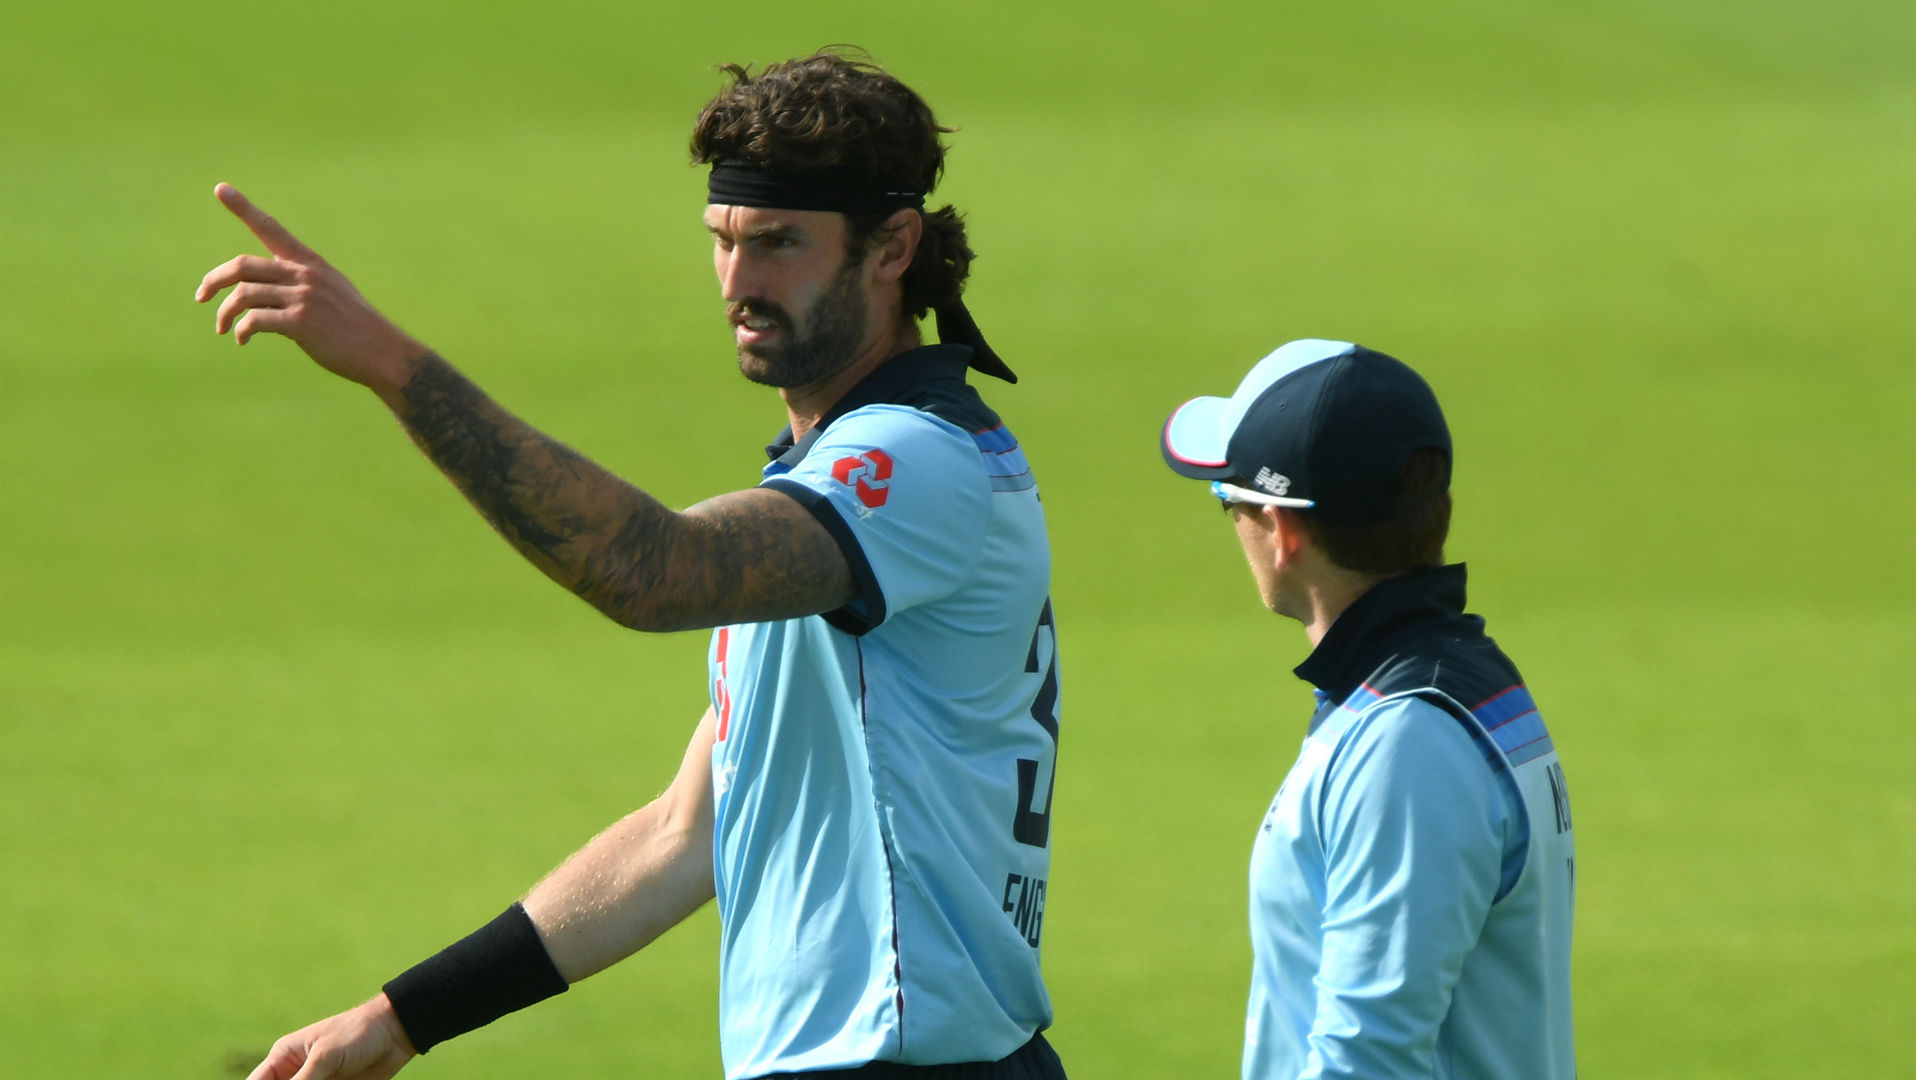 Reece Topley finally made his England return on Saturday, but injury has ruled him out of the third ODI with Ireland.